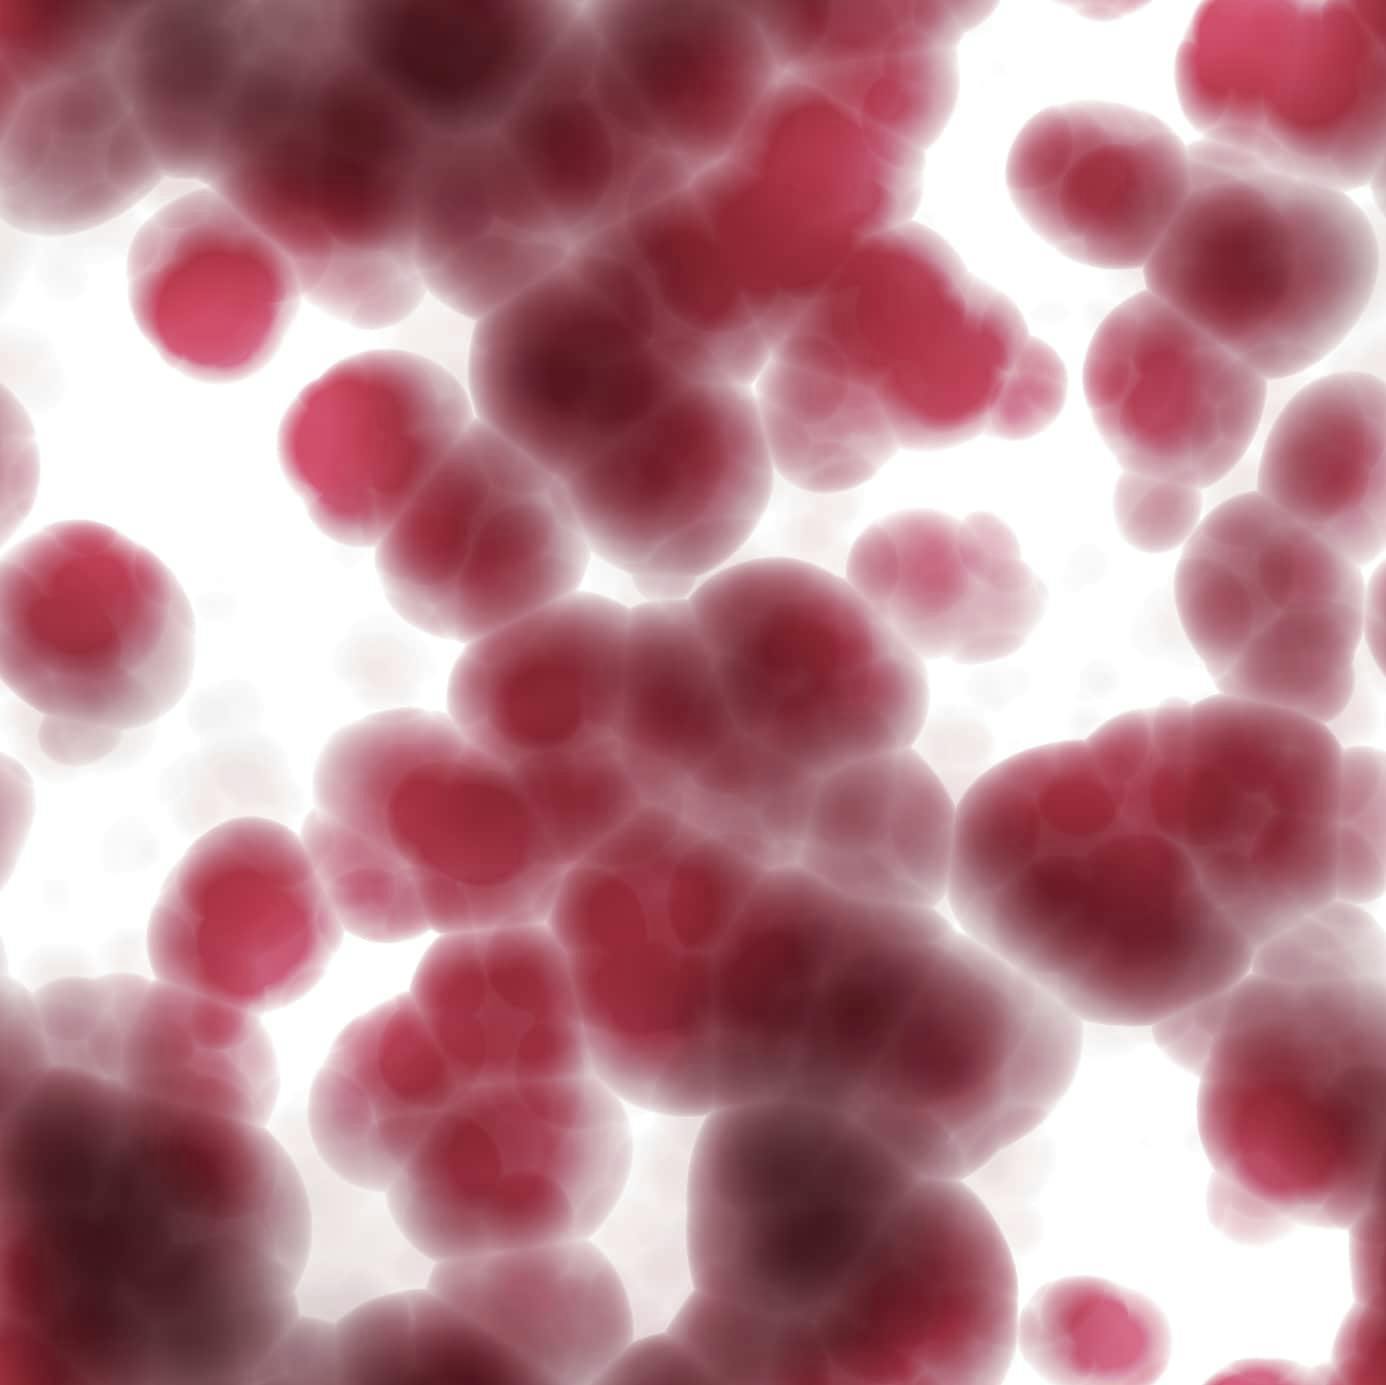 Axi-Cel Highly Effective as First-line Option in High-risk Large B-Cell Lymphoma